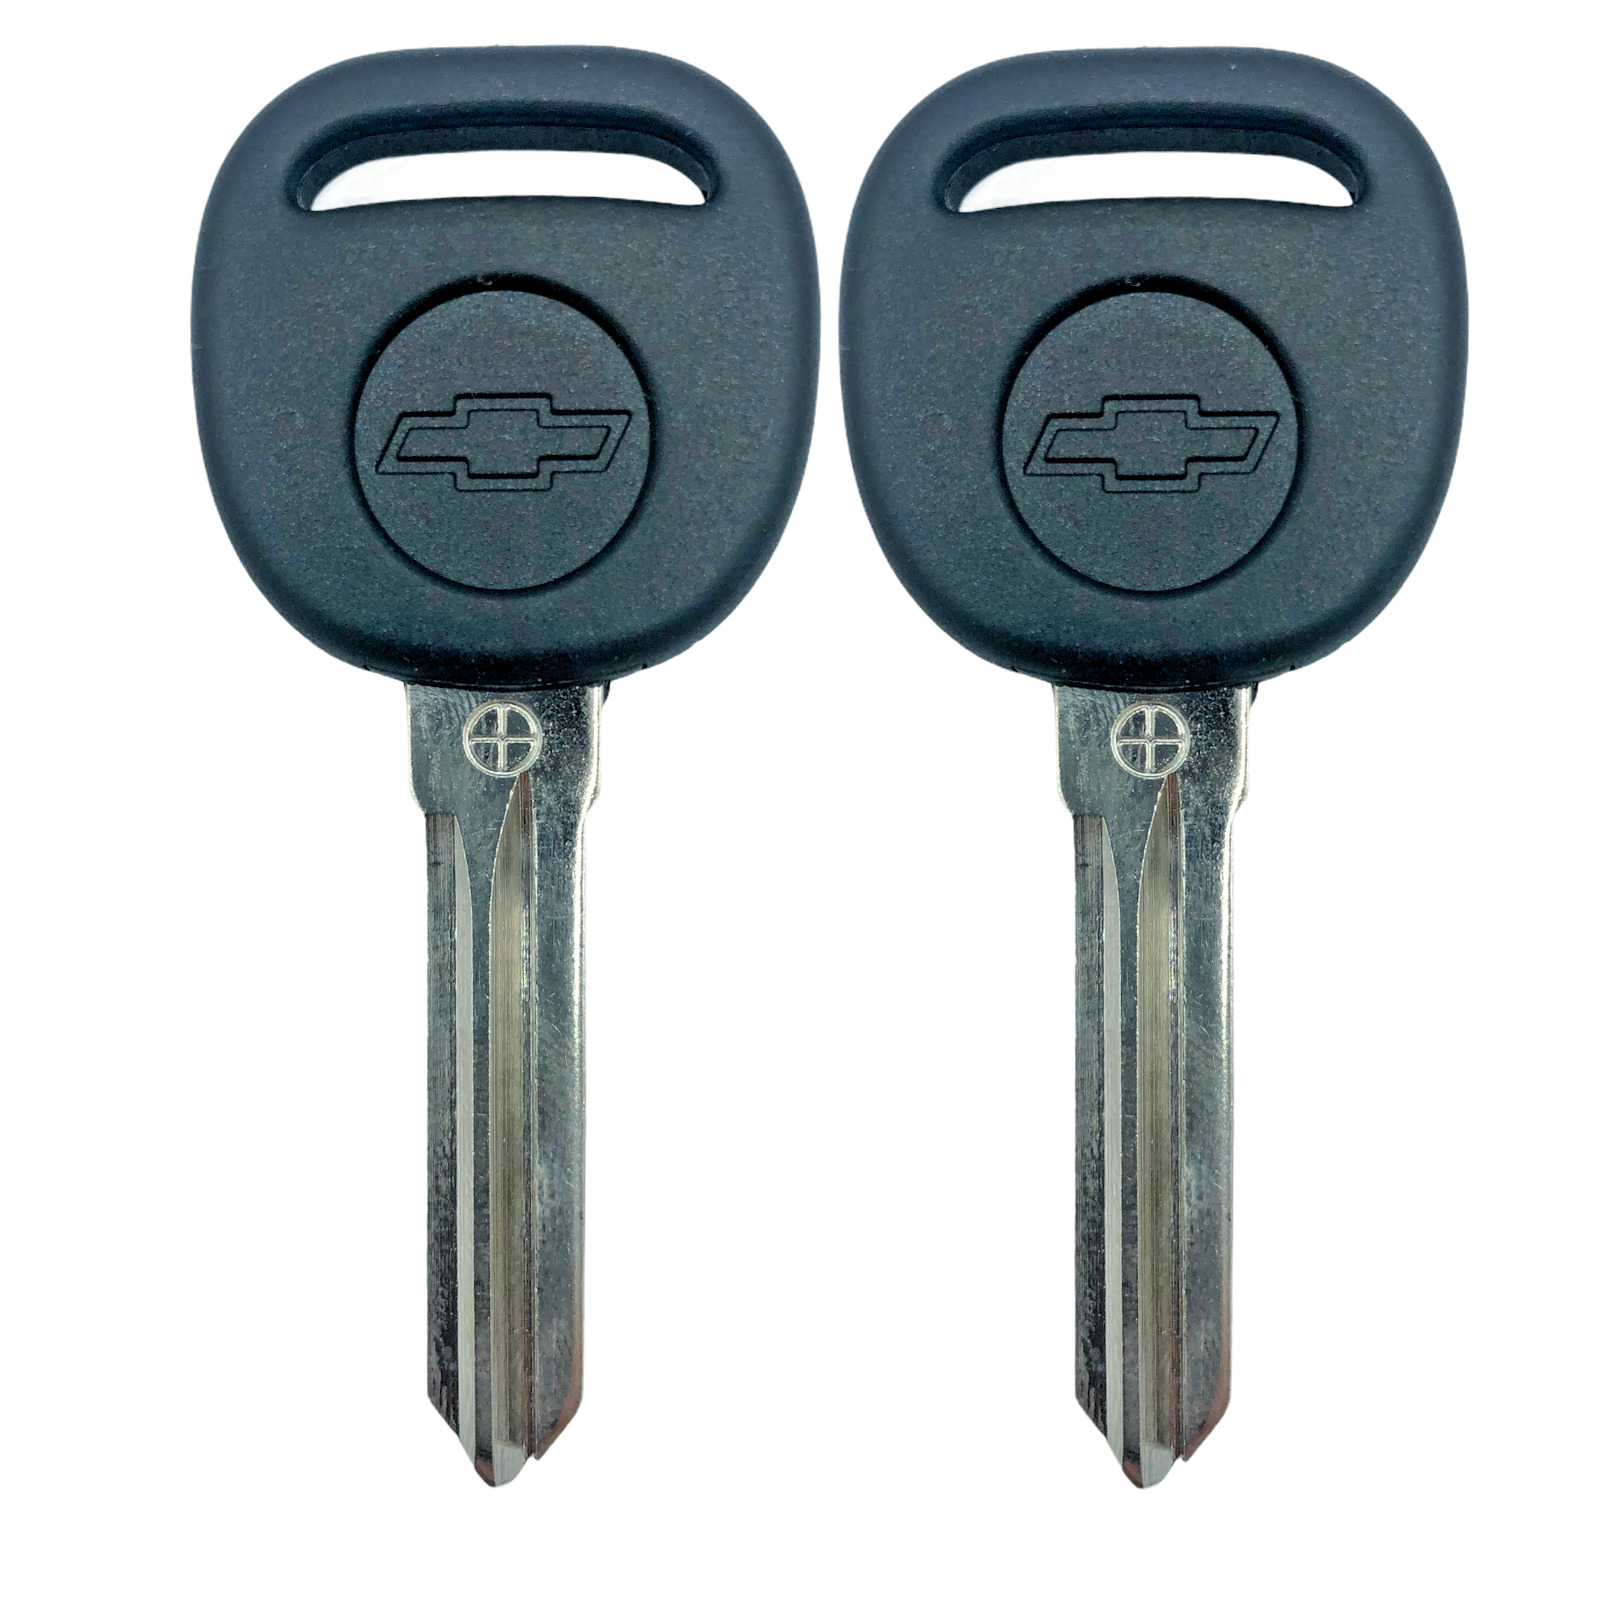 2 Brand New Replacement Transponder Ignition Chip Key Uncut Blade Blank B111